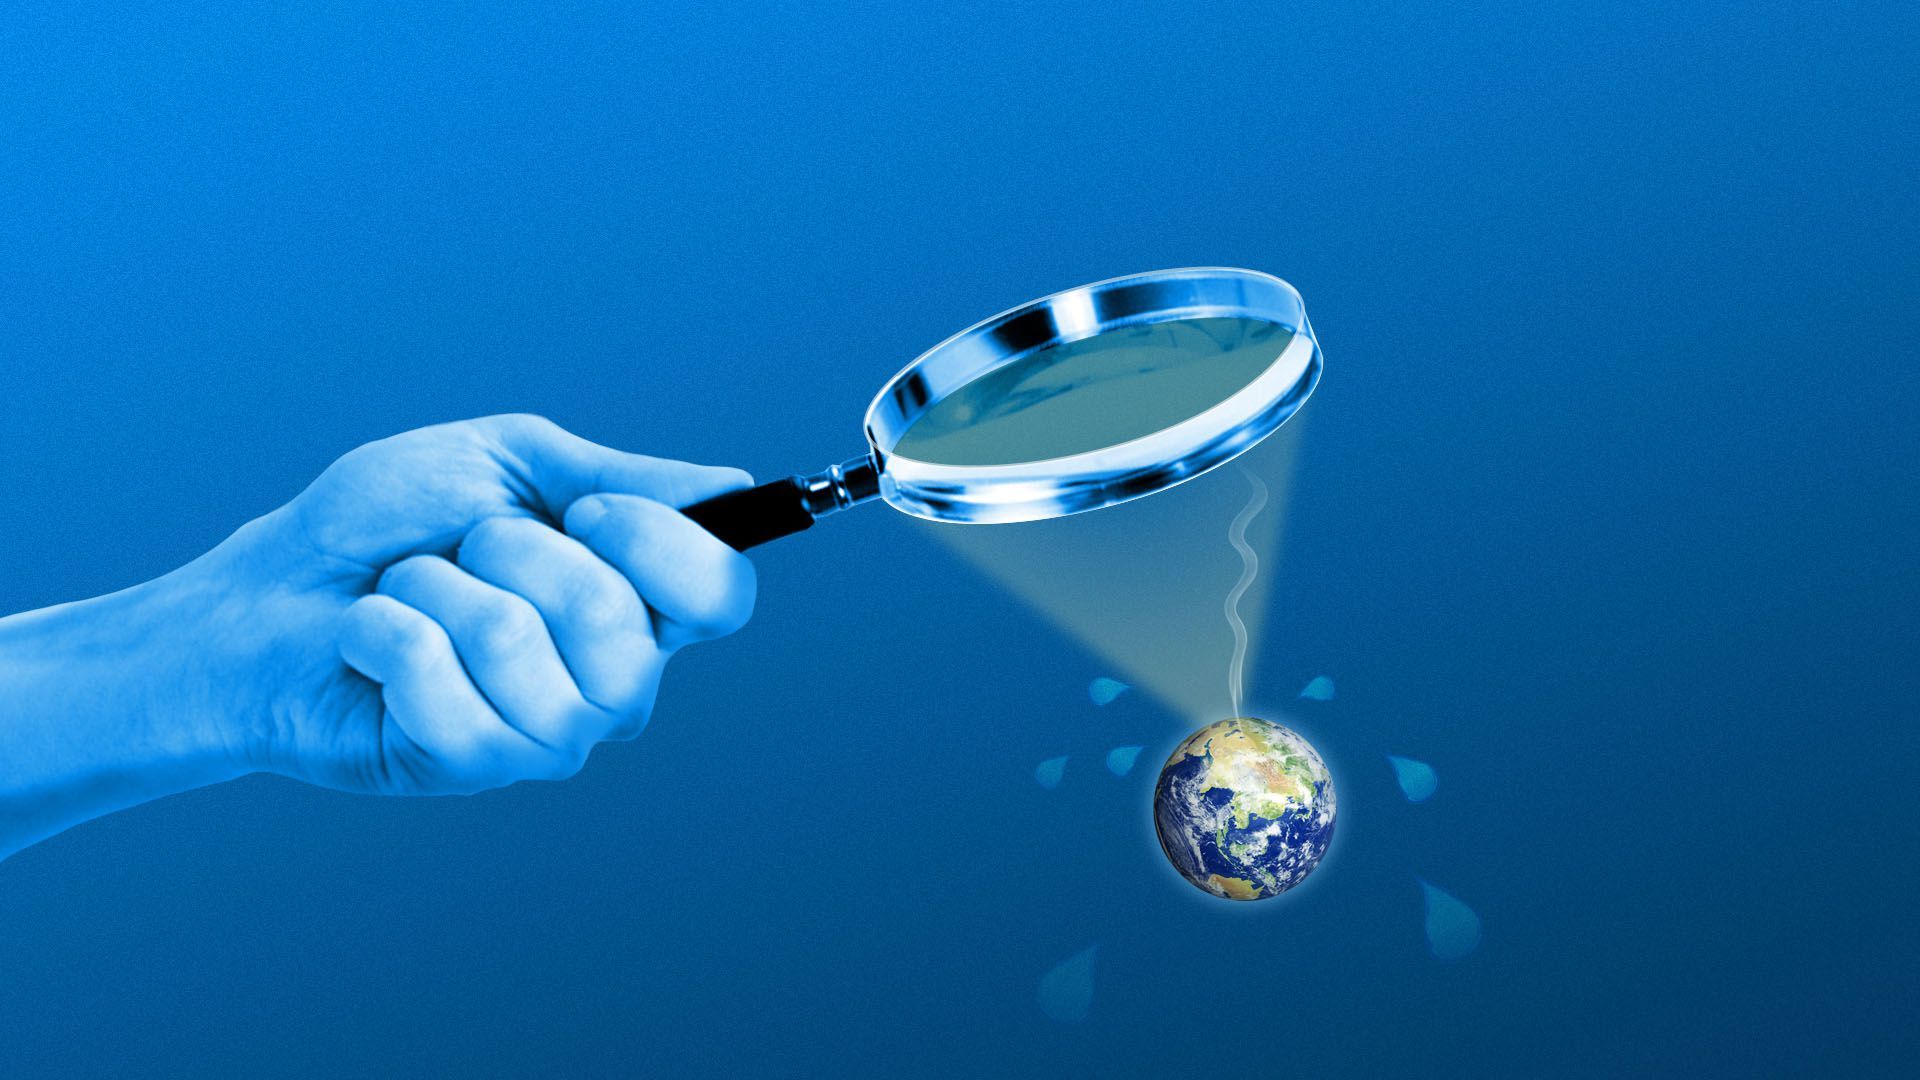 Illustration of a hand holding a magnifying glass over a tiny earth, burning it